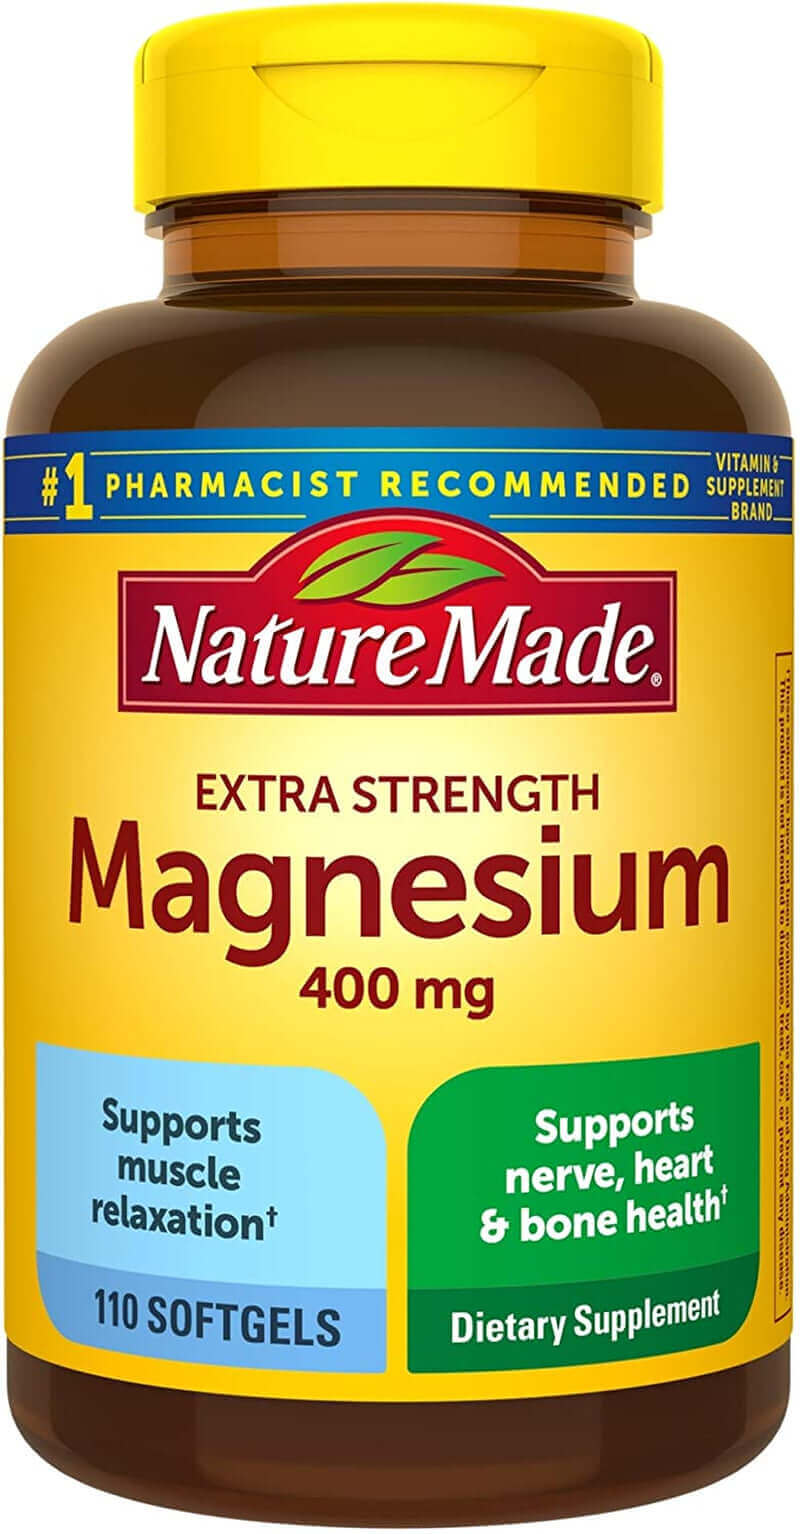 Nature Made Extra Strength Magnesium Oxide 400 Mg, Dietary Supplement for Muscle, Nerve, Bone and Heart Support, 60 Softgels, 60 Day Supply - vitamenstore.com